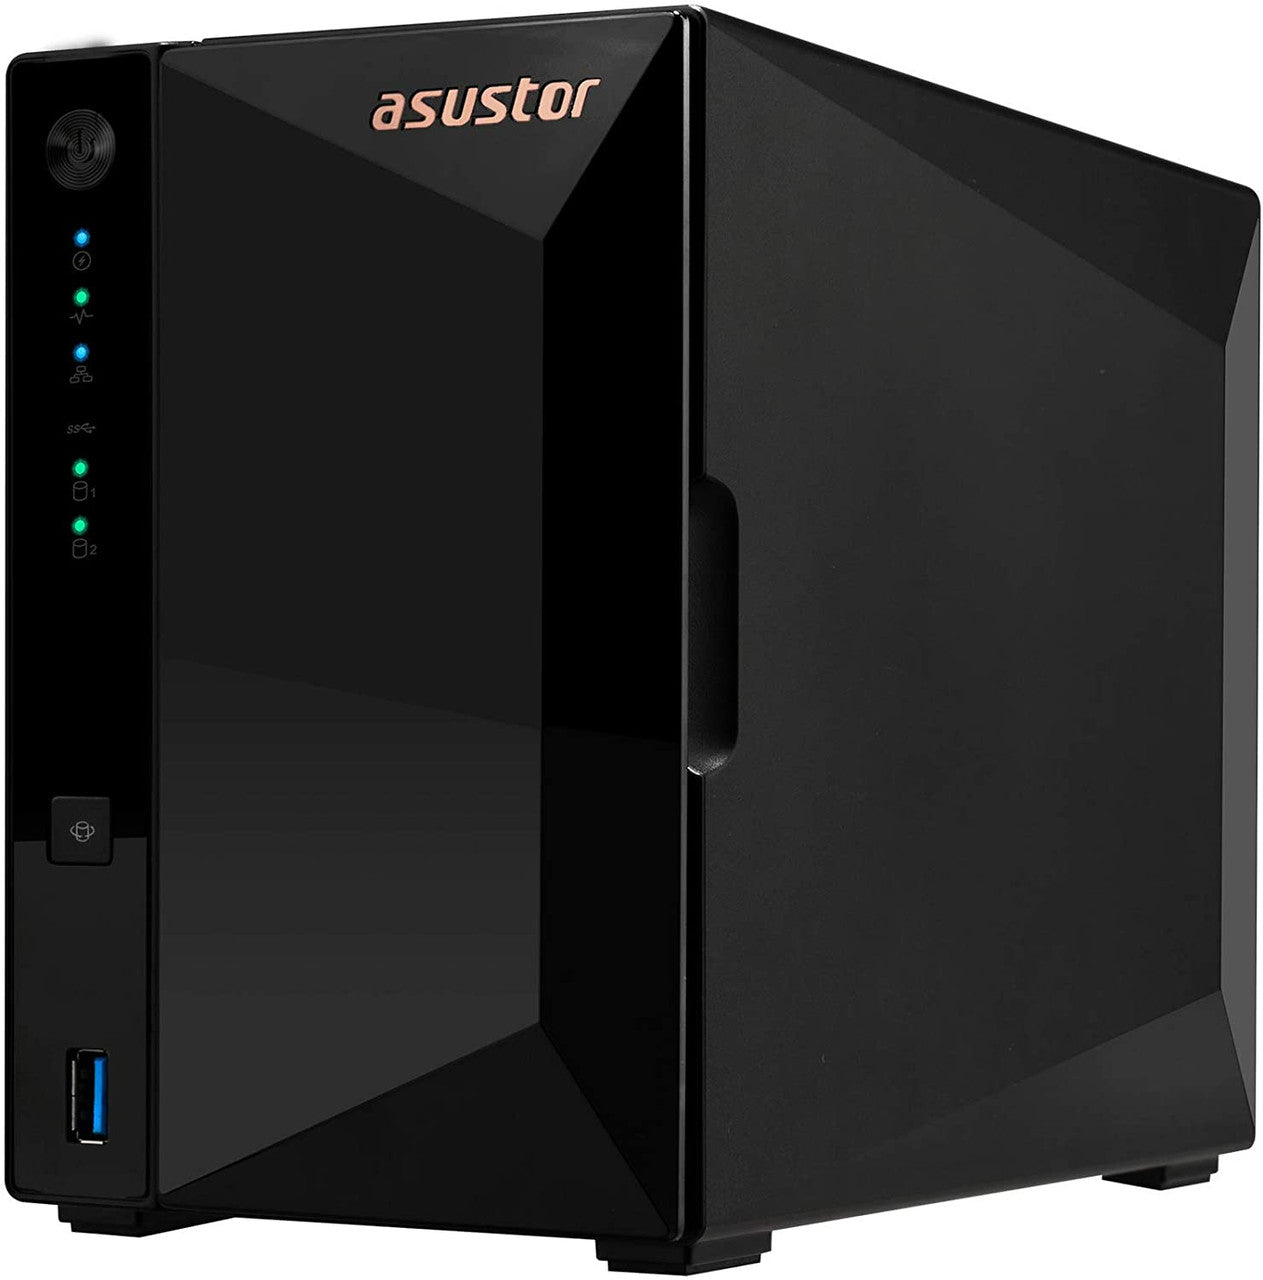 Asustor AS3302T 2-Bay Drivestor 2 PRO NAS with 2GB RAM and 28TB (2x14TB) Western Digital RED Plus Drives Fully Assembled and Tested